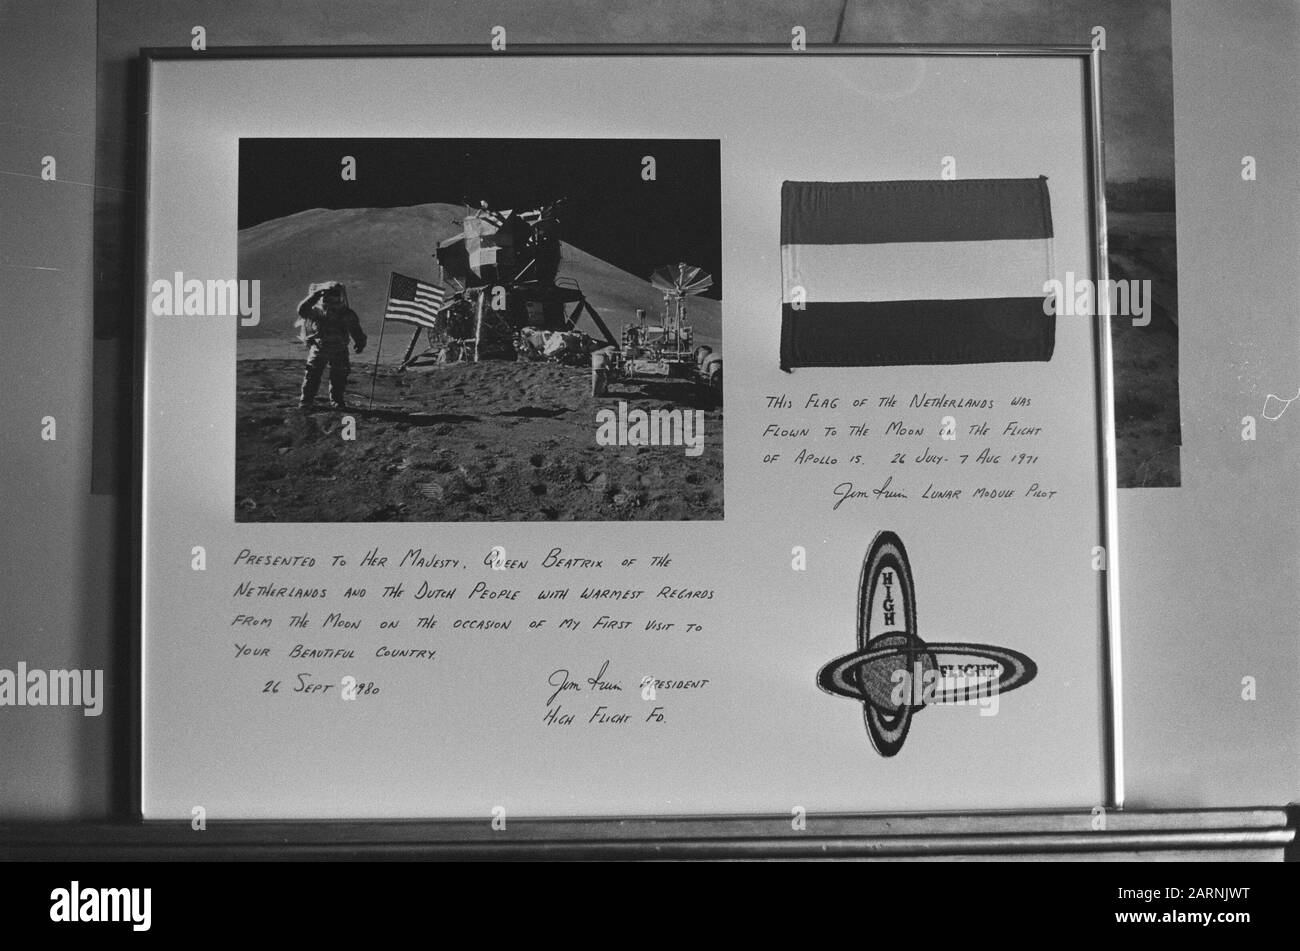 Pieter van Vollenhoven received at Palace Lange Voorhout by American astronaut Jim Irwin a Dutch flag, which had been 5 days on the moon  Flag and photo framed Date: September 26, 1980 Keywords: astronauts, flags Institution name: Palace Lange Voorhout Stock Photo